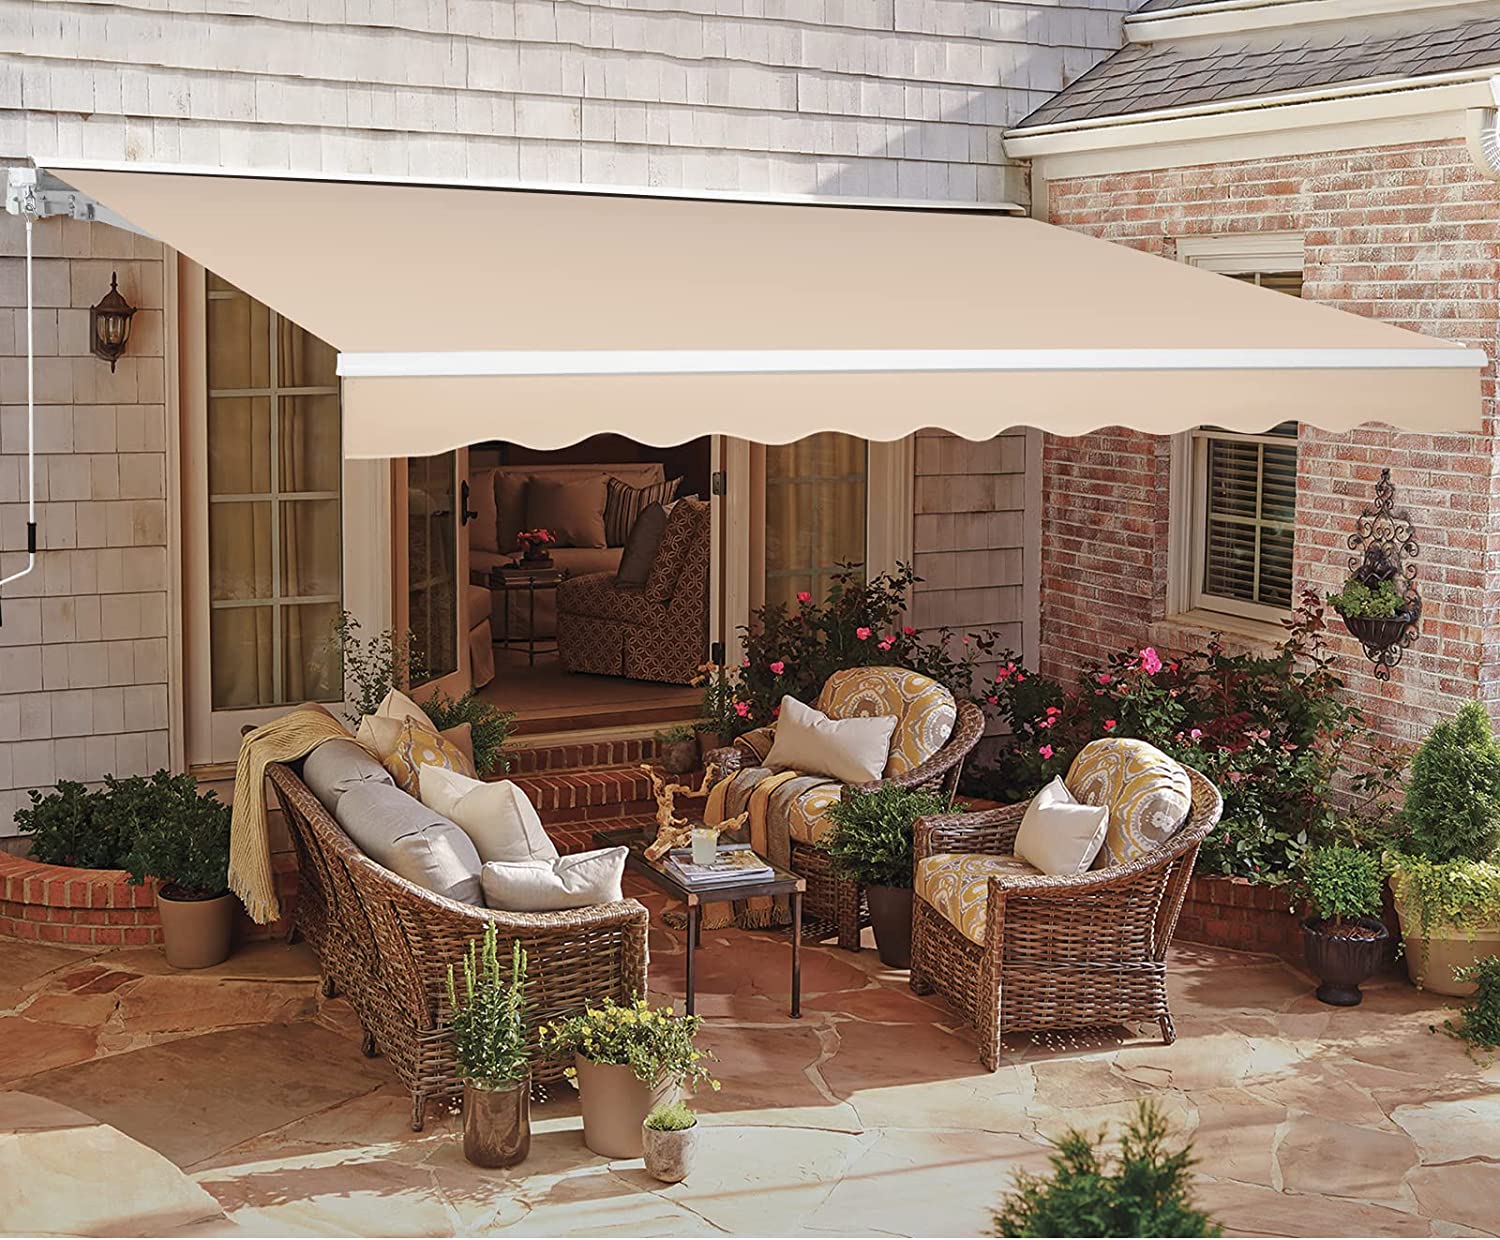 AECOJOY 13' x 8' Manual Retractable Patio Awning,Outdoor Awning Retractable Sunshade Shelter-Beige - image 1 of 6